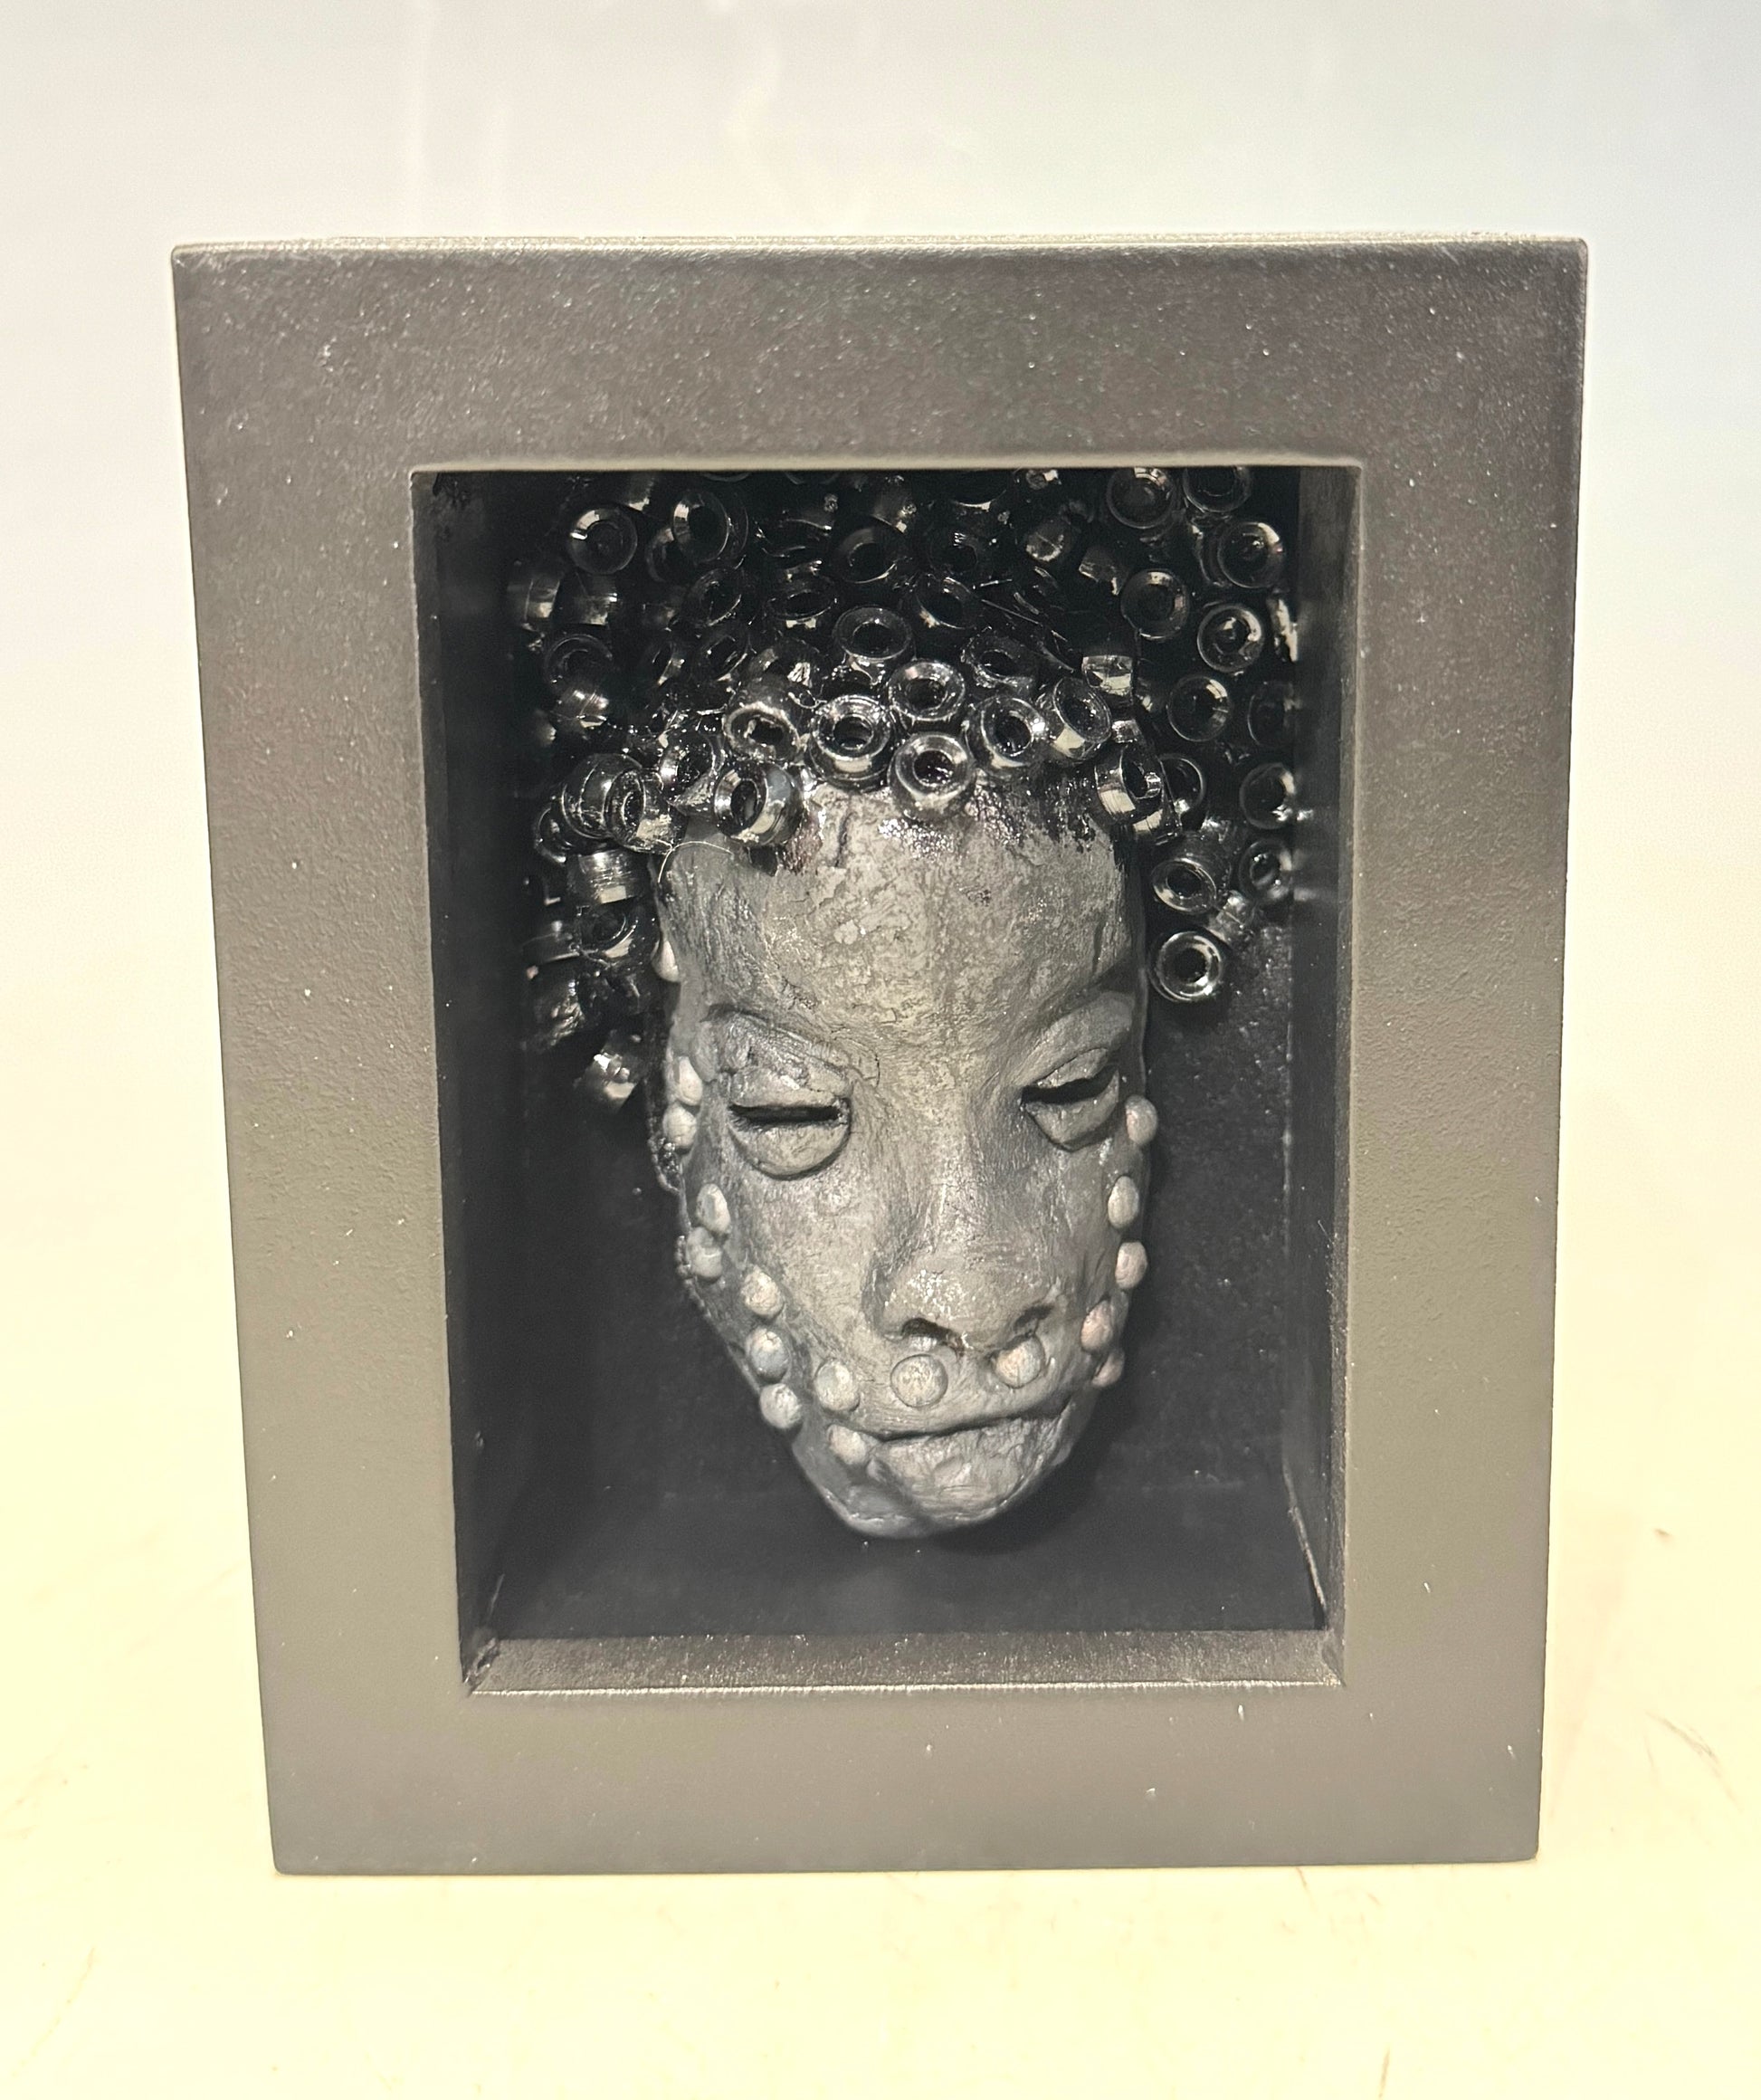 Randy is a mask that is raku fired and is enclosed in a 4“ x 4“ black shadowbox. He has over 50 pony beads as hair. He has over 50 pony beads as hair!